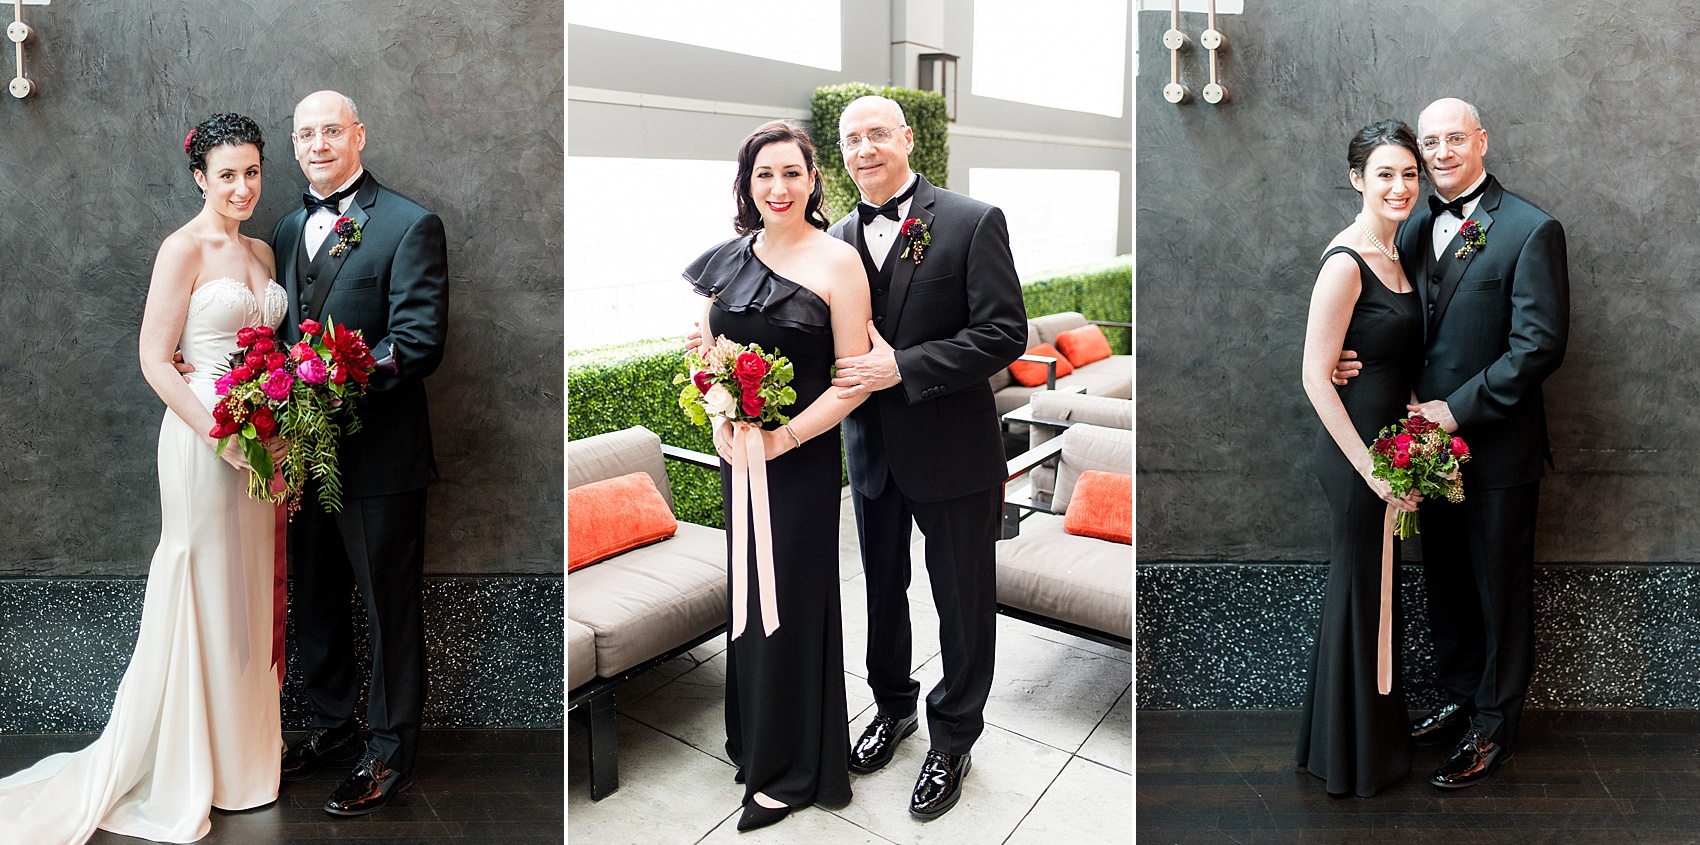 W Hoboken wedding photos by Mikkel Paige Photography at this New Jersey venue close to NYC. The father of the bride took a photo with each of his three daughters on a special wedding day, of his middle child. #mikkelpaige #HobokenWedding #NewJerseyPhotographer #NewYorkCityPhotographer #NYCweddingphotographer #brideandgroomphotos #redpeonies #romanticwedding #springwedding #CityWedding